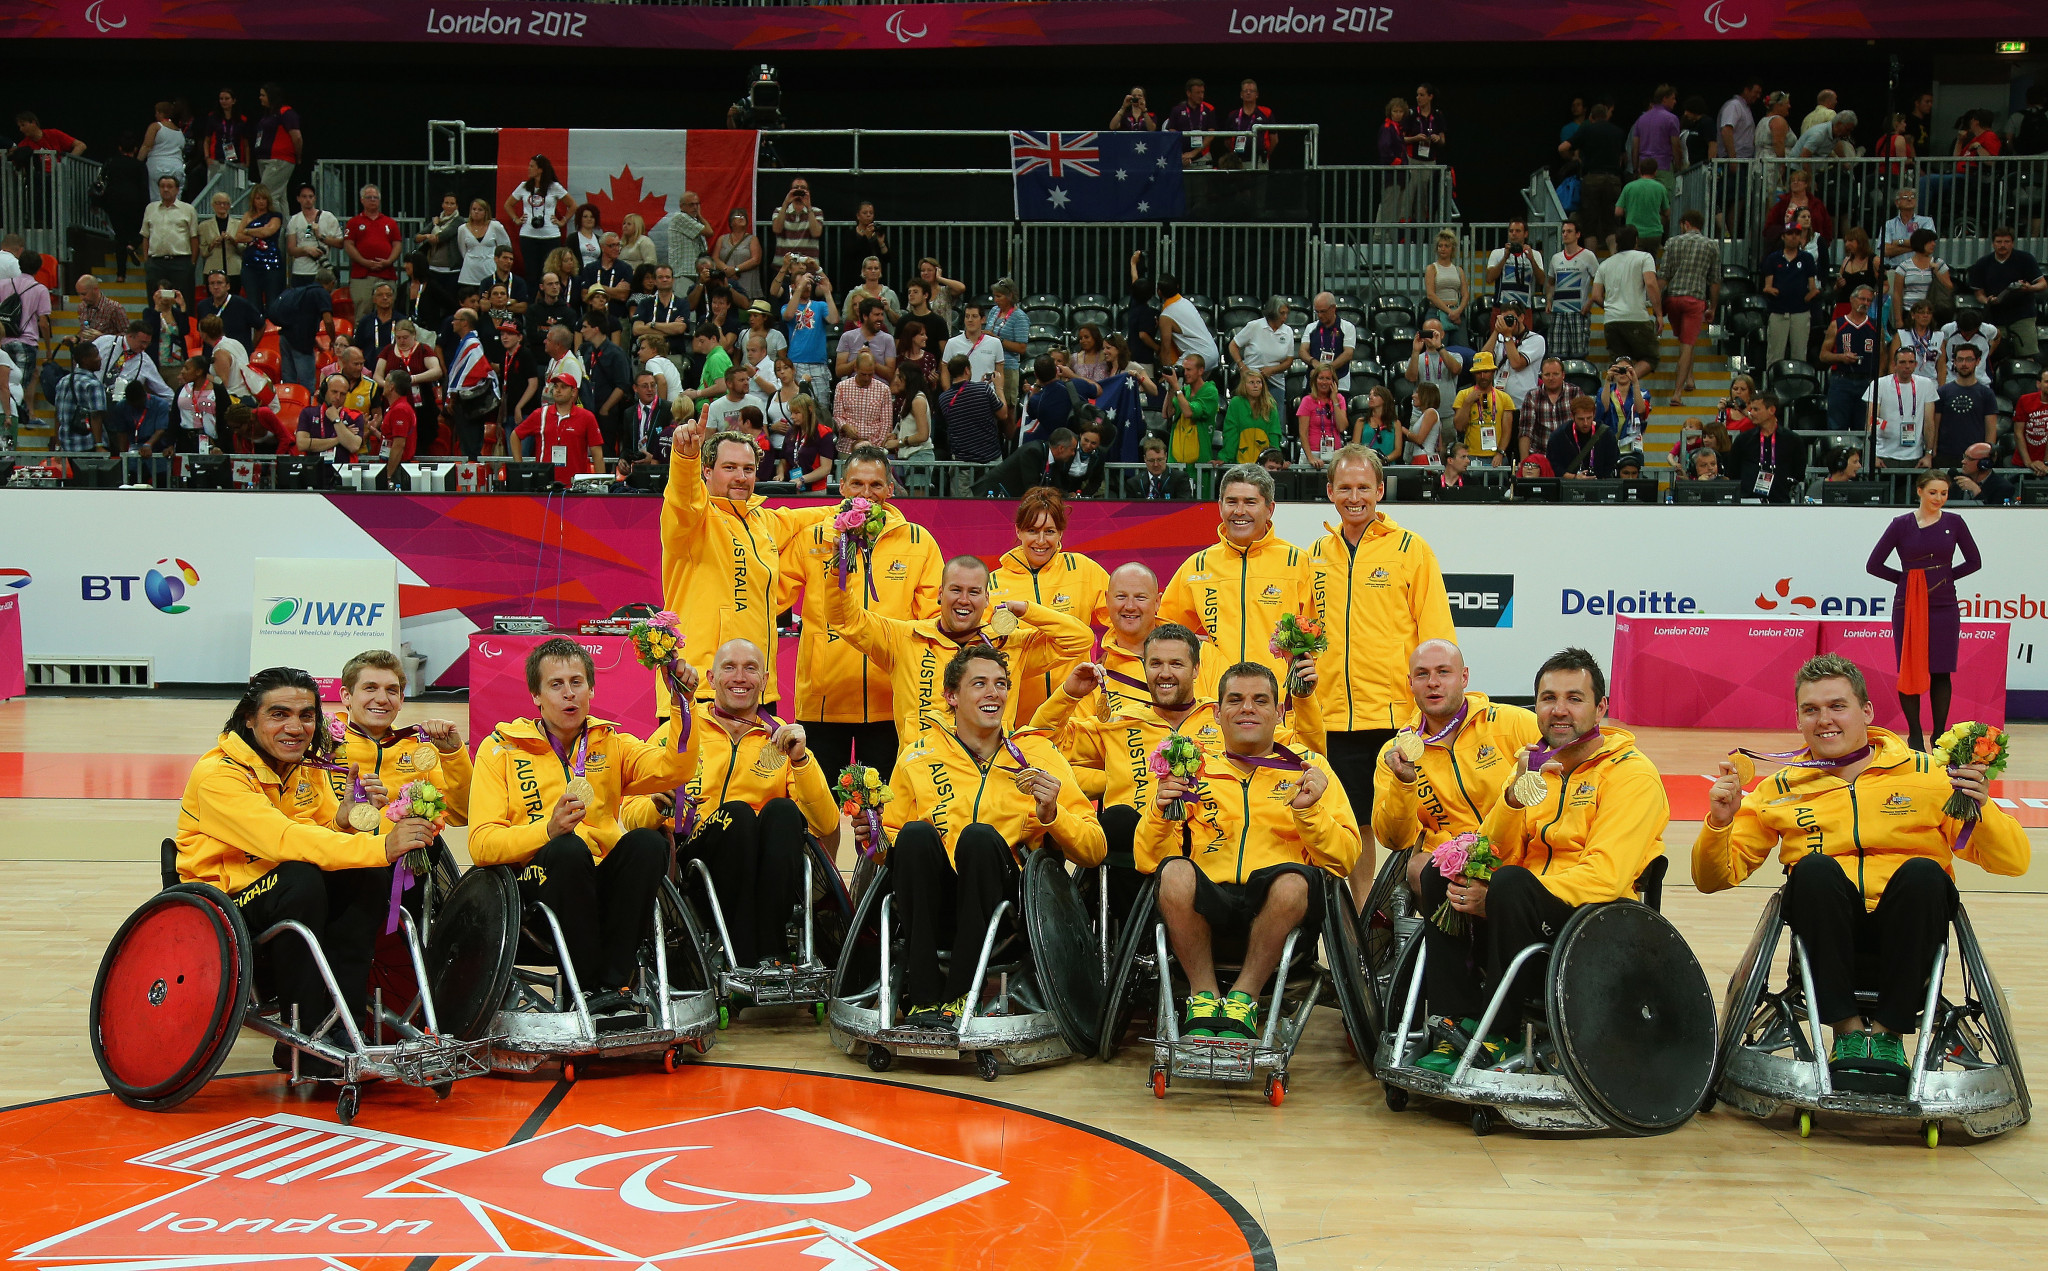 Australia won two wheelchair basketball silver medals at London 2012 ©Getty Images